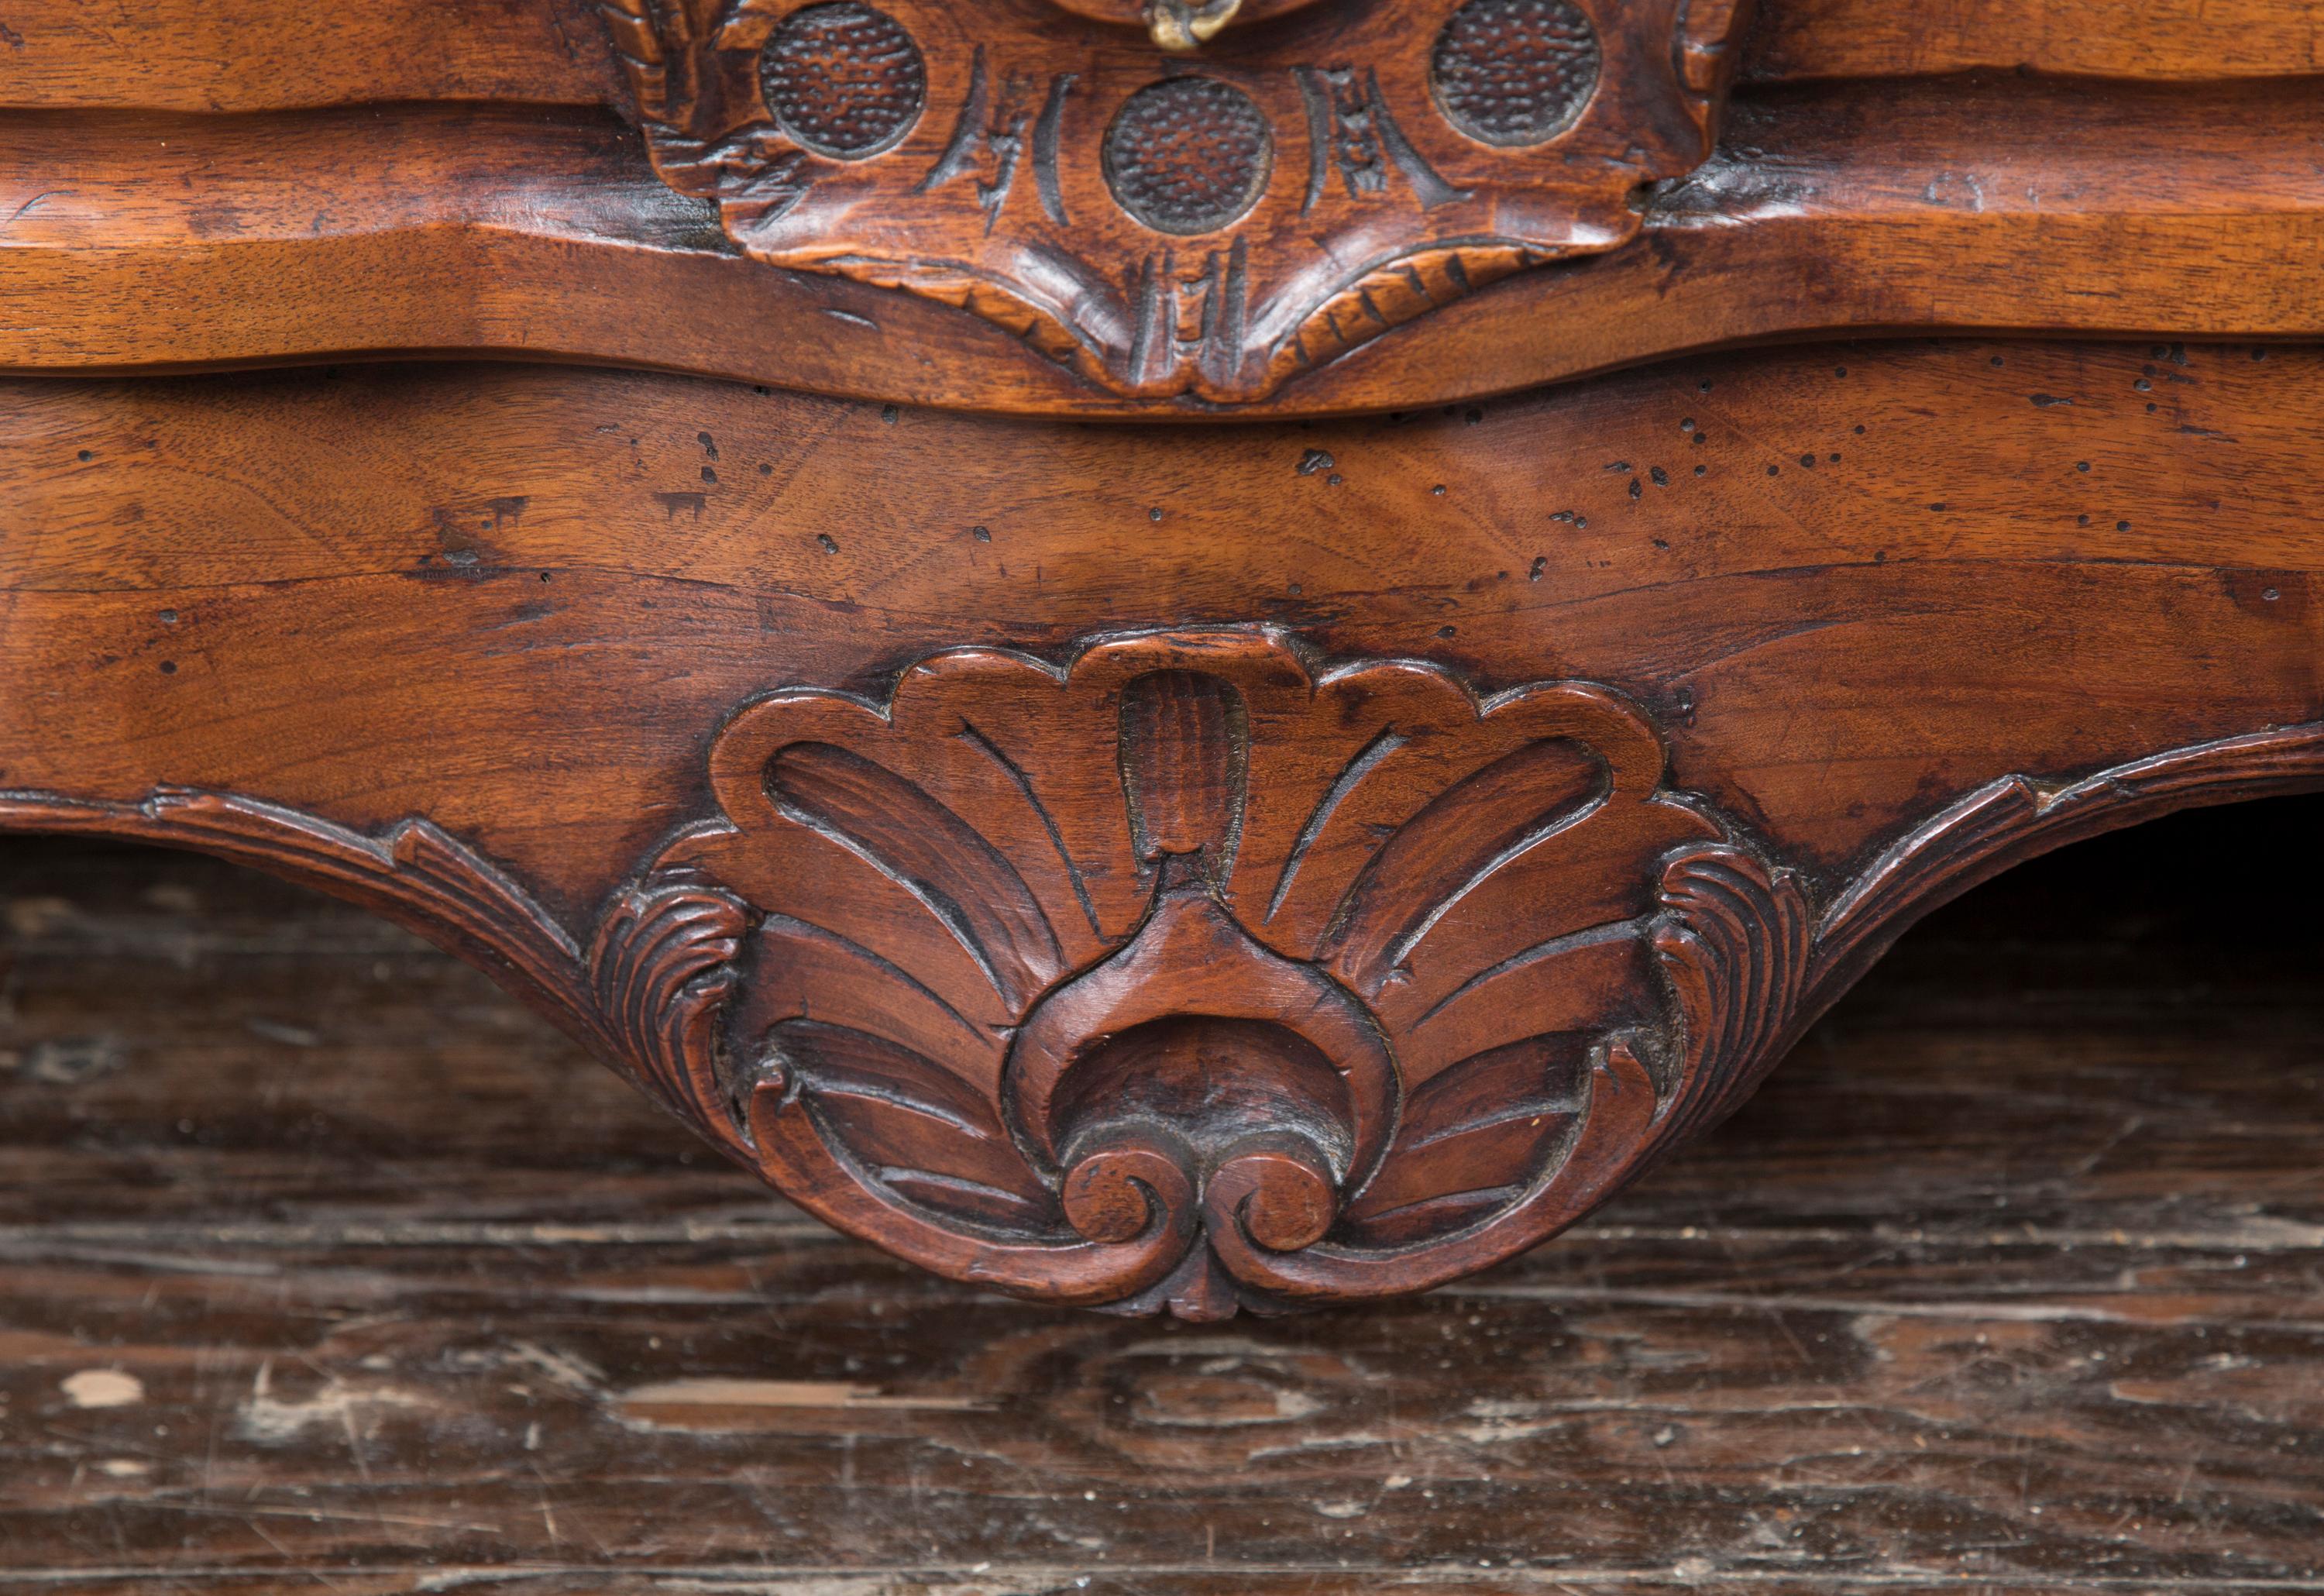 Early 18th Century Regence Period Lyonnaise Walnut Commode / Chest of Drawers For Sale 5